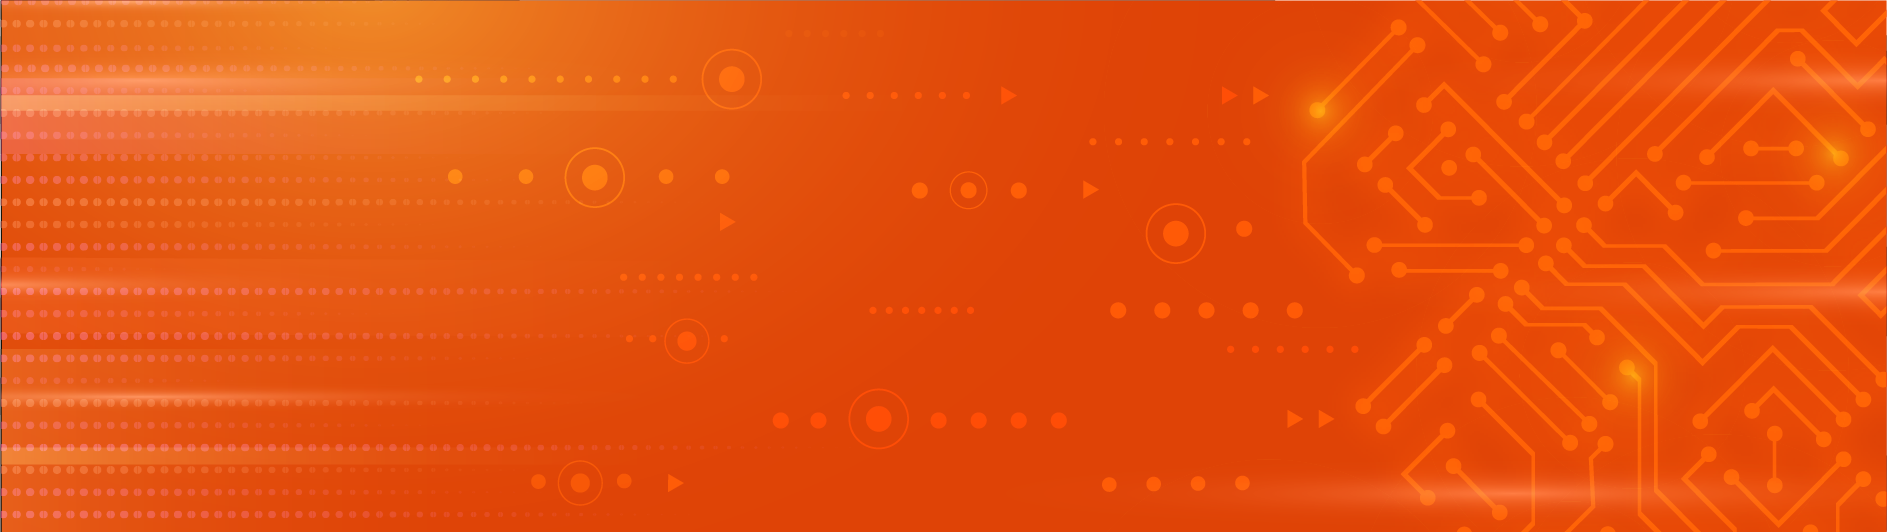 Orange header with dots and lines